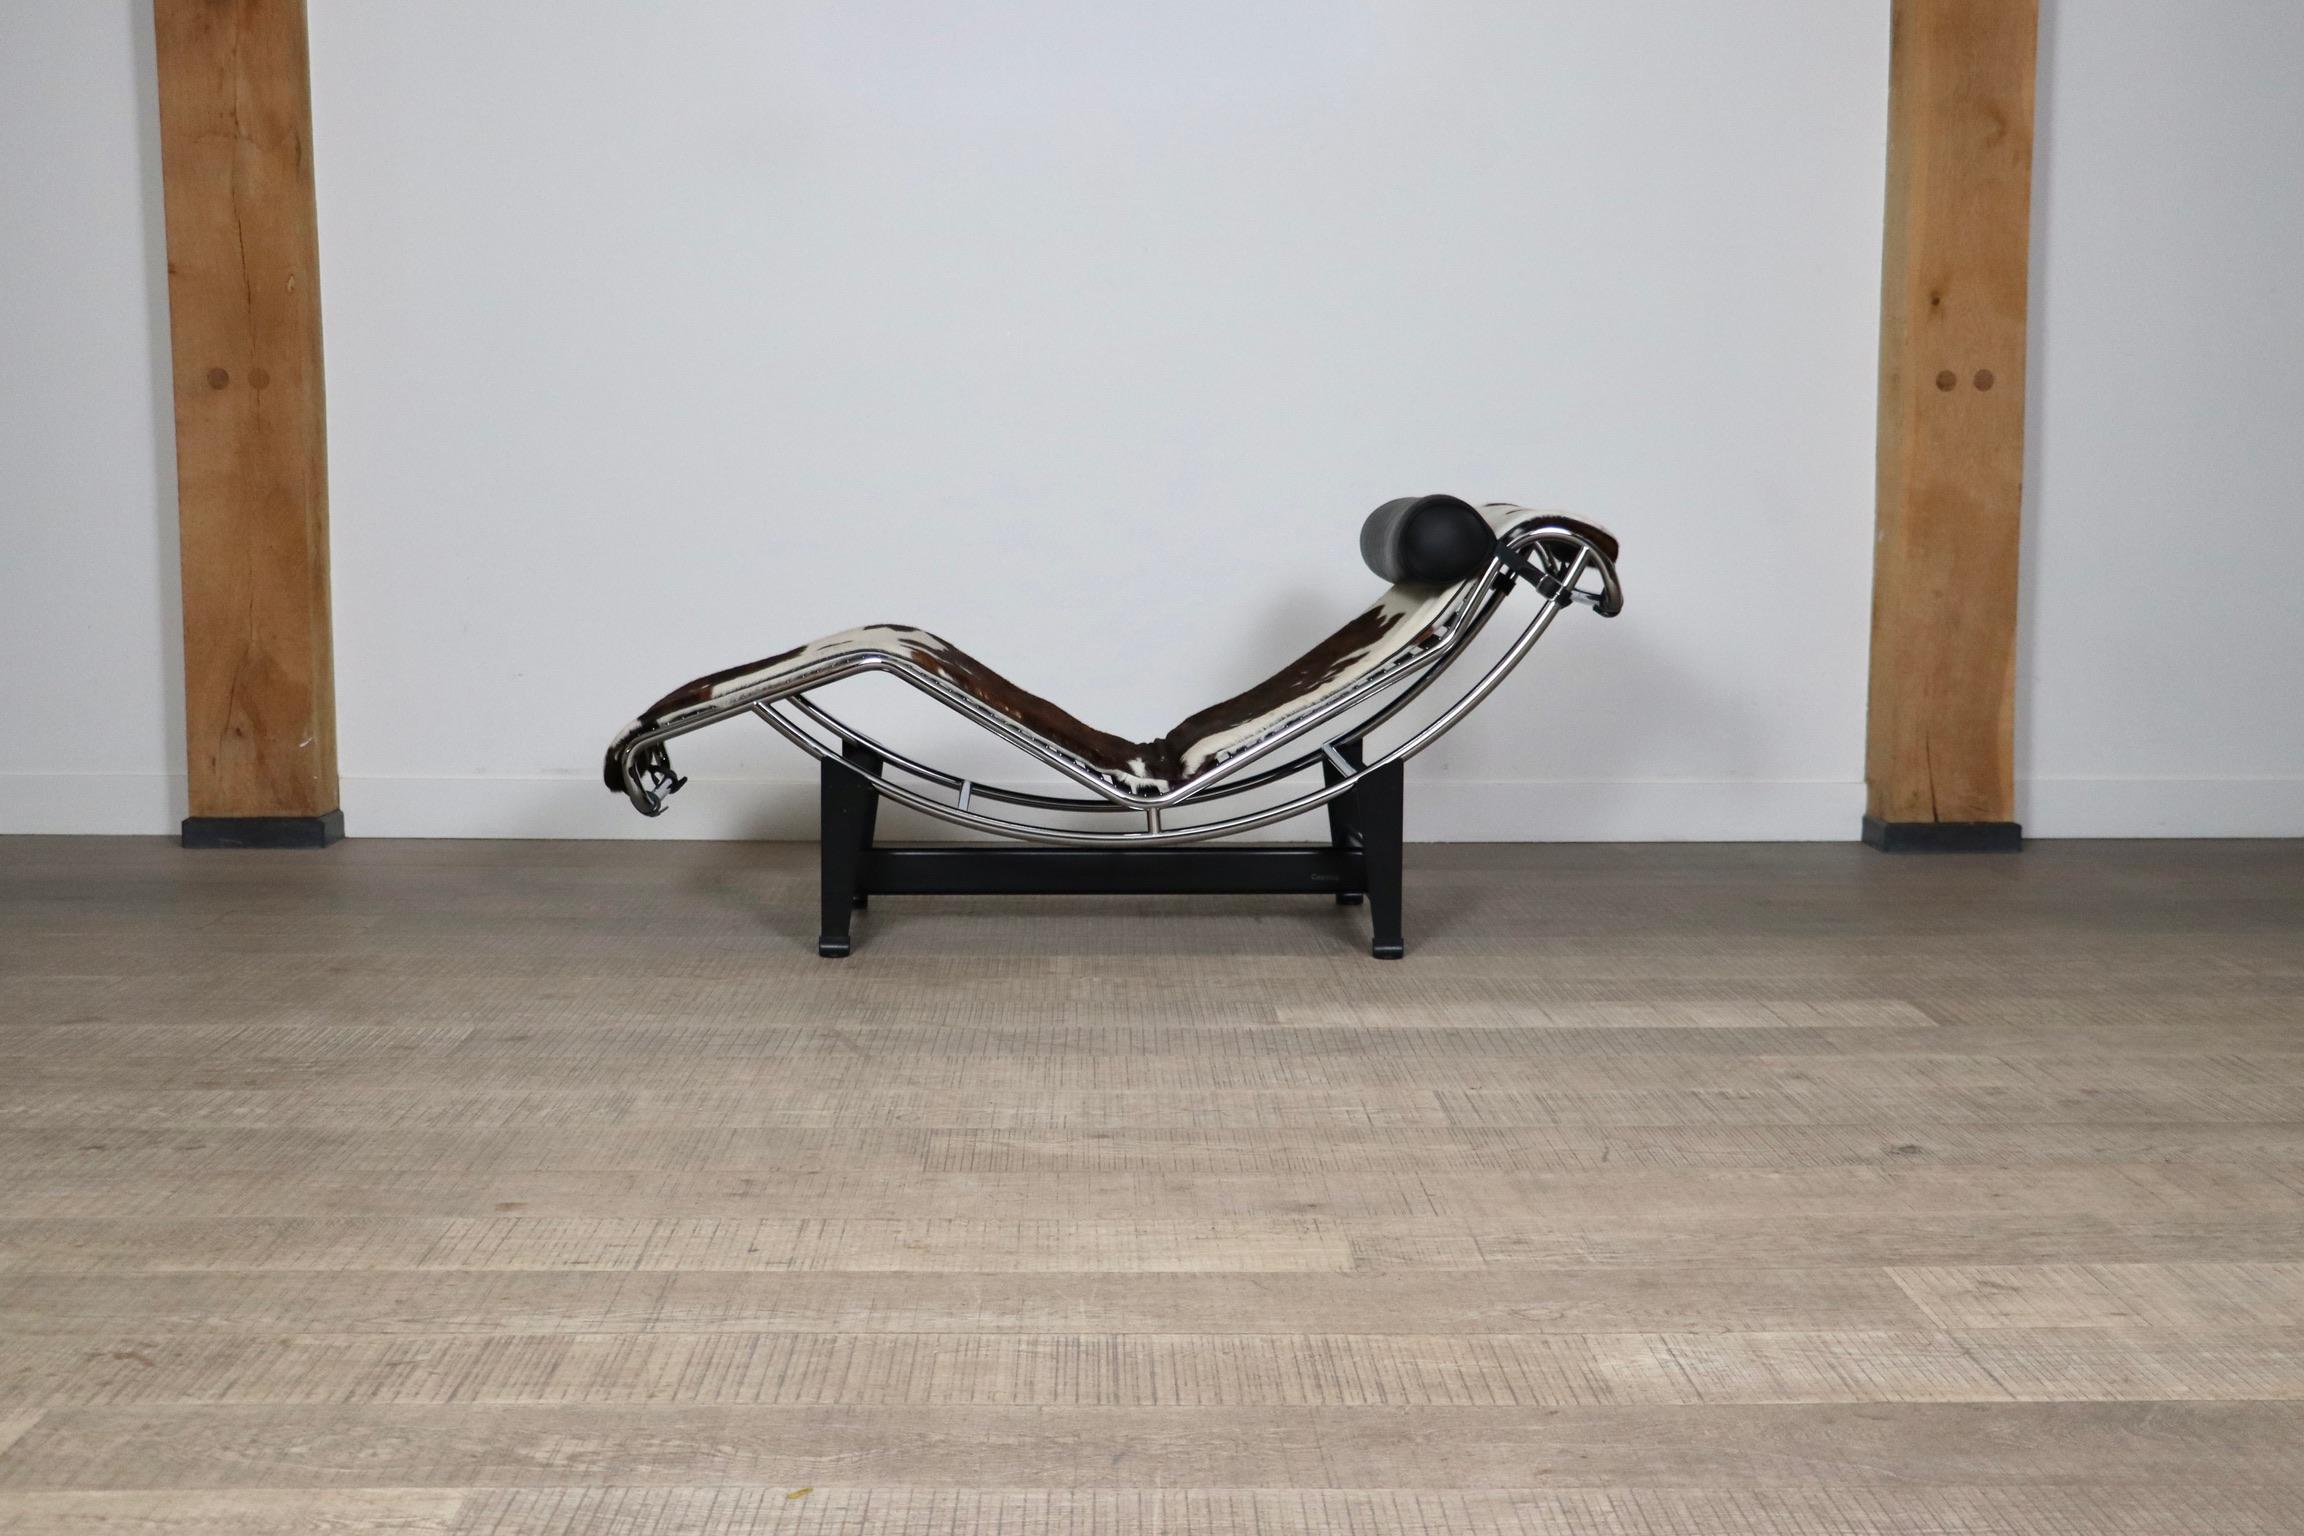 Wonderful chaise longue, model LC4 with ponyskin, designed by Le Corbusier, Pierre Jeanneret and Charlotte Perriand for Cassina in 1965.

The chaise Longue was born from the inspiration of the three design artists who wanted to design a comfortable